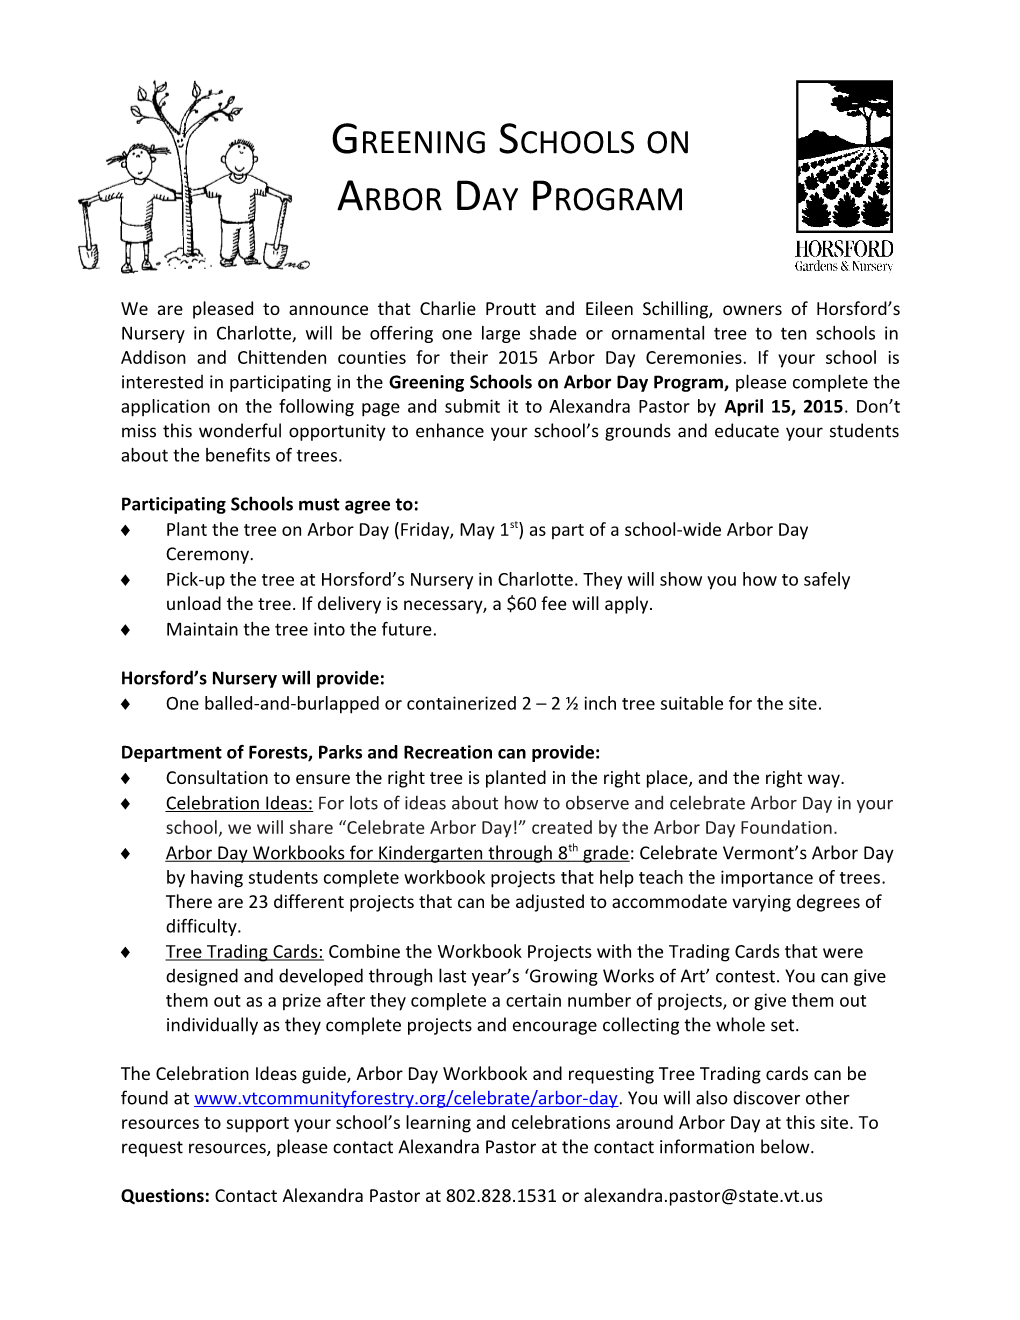 Arbor Day Trees Available